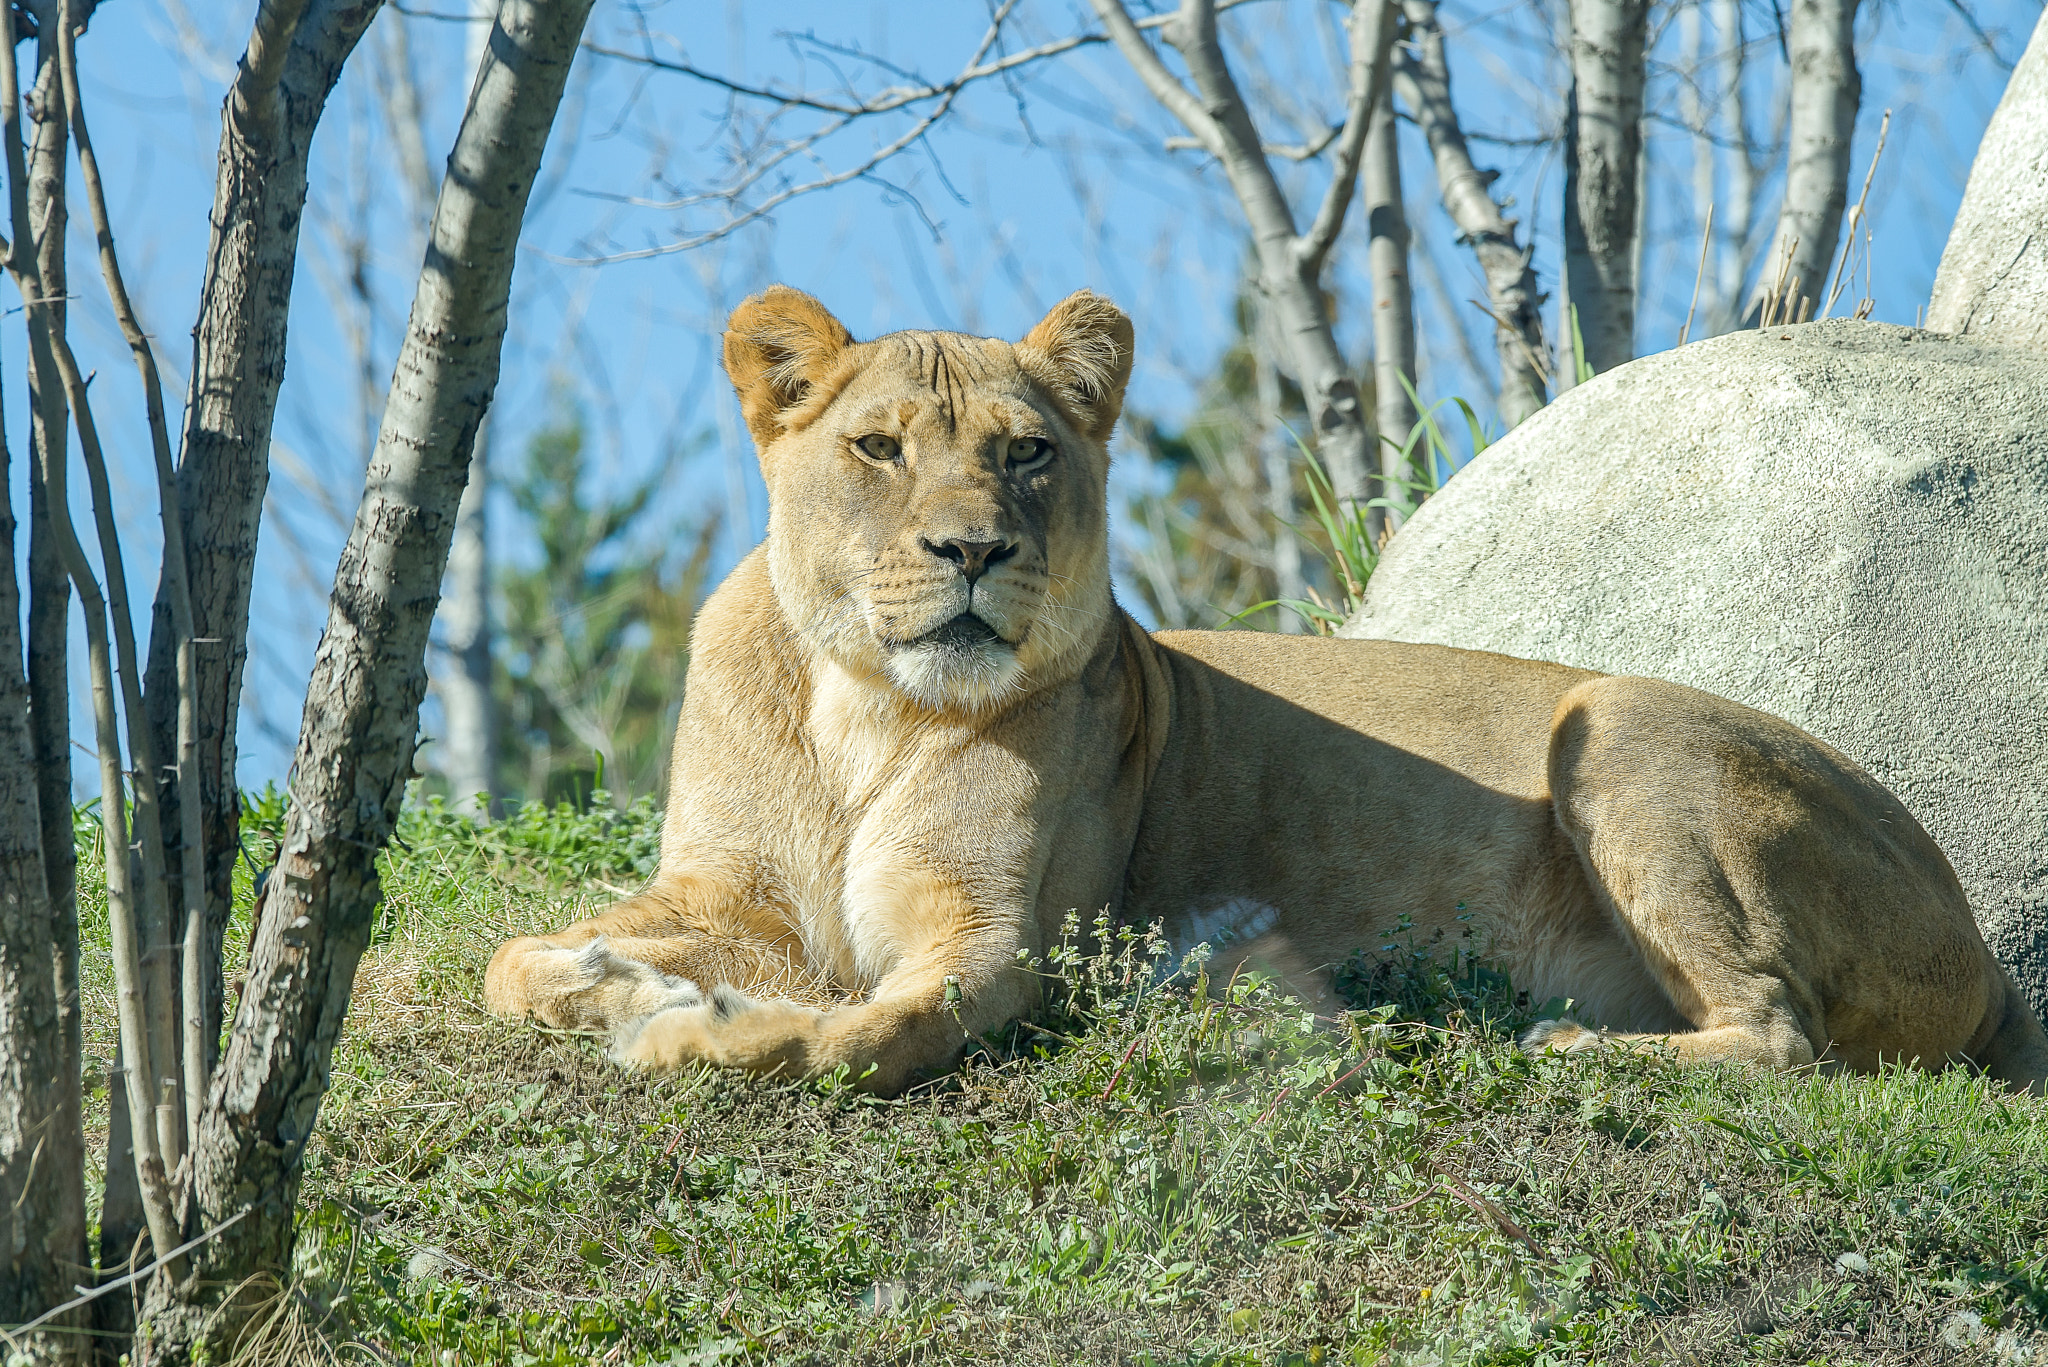 Sony a99 II sample photo. Lioness photography